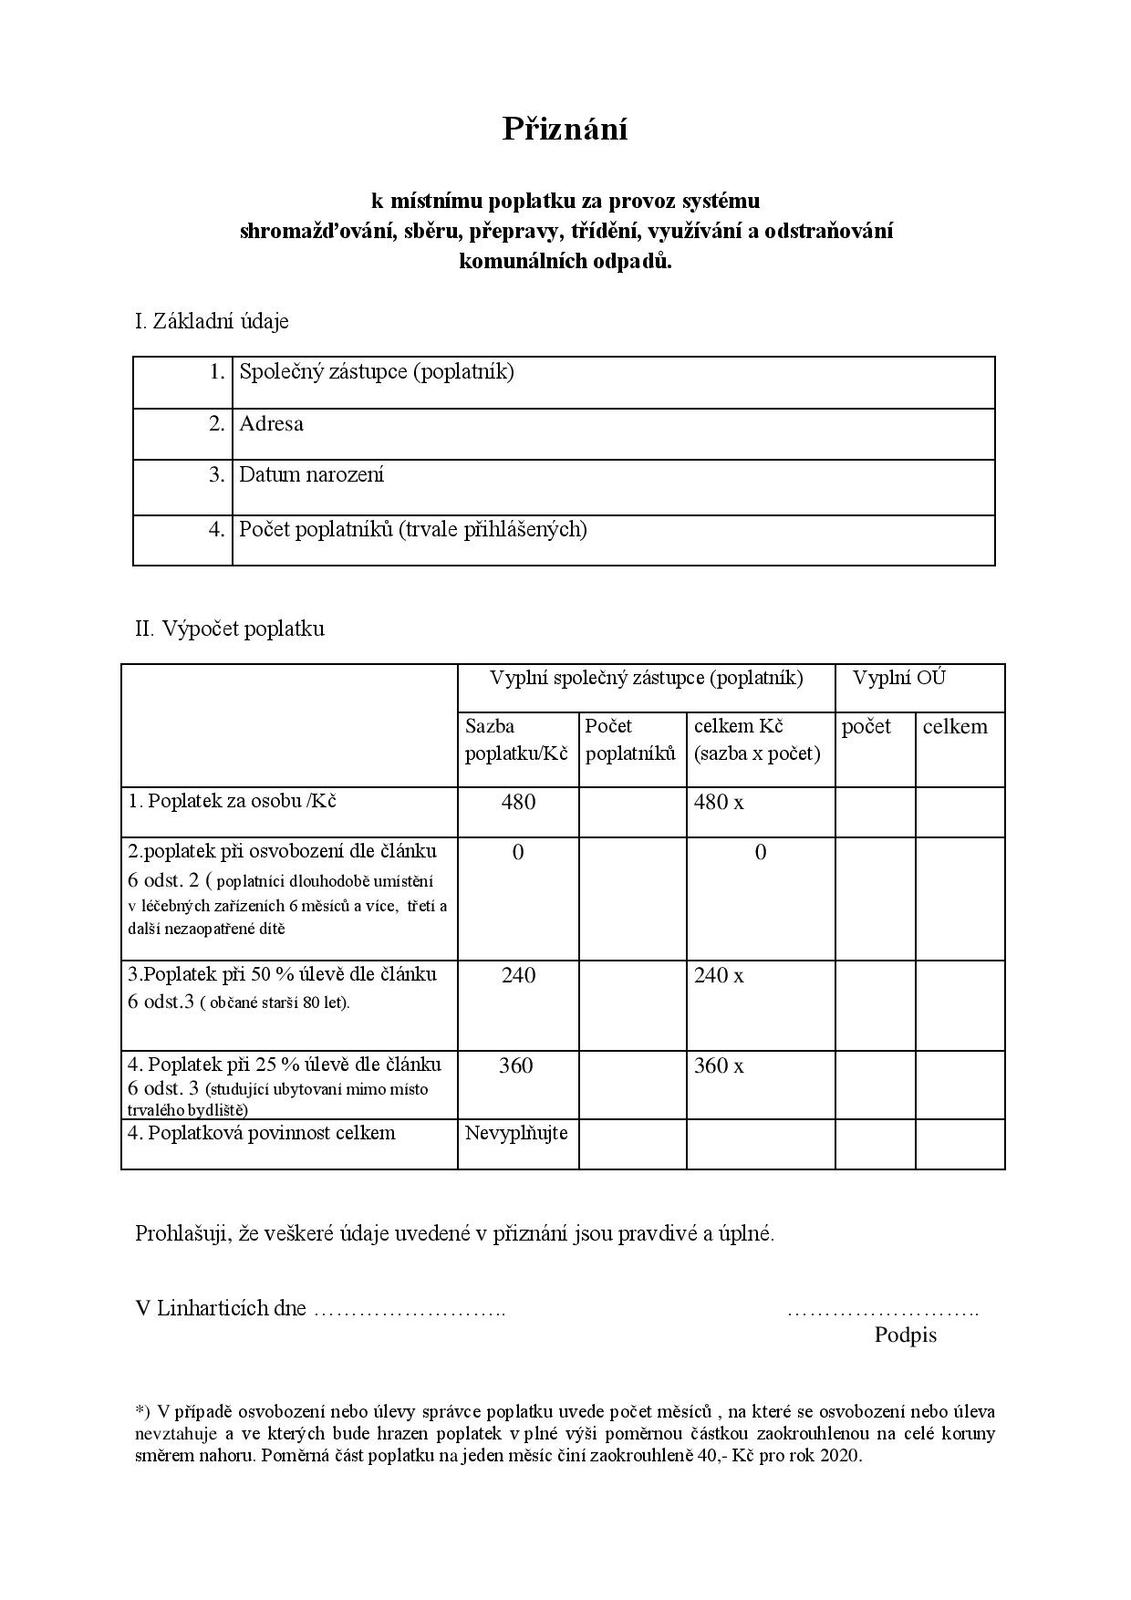 Document-page-001.jpg